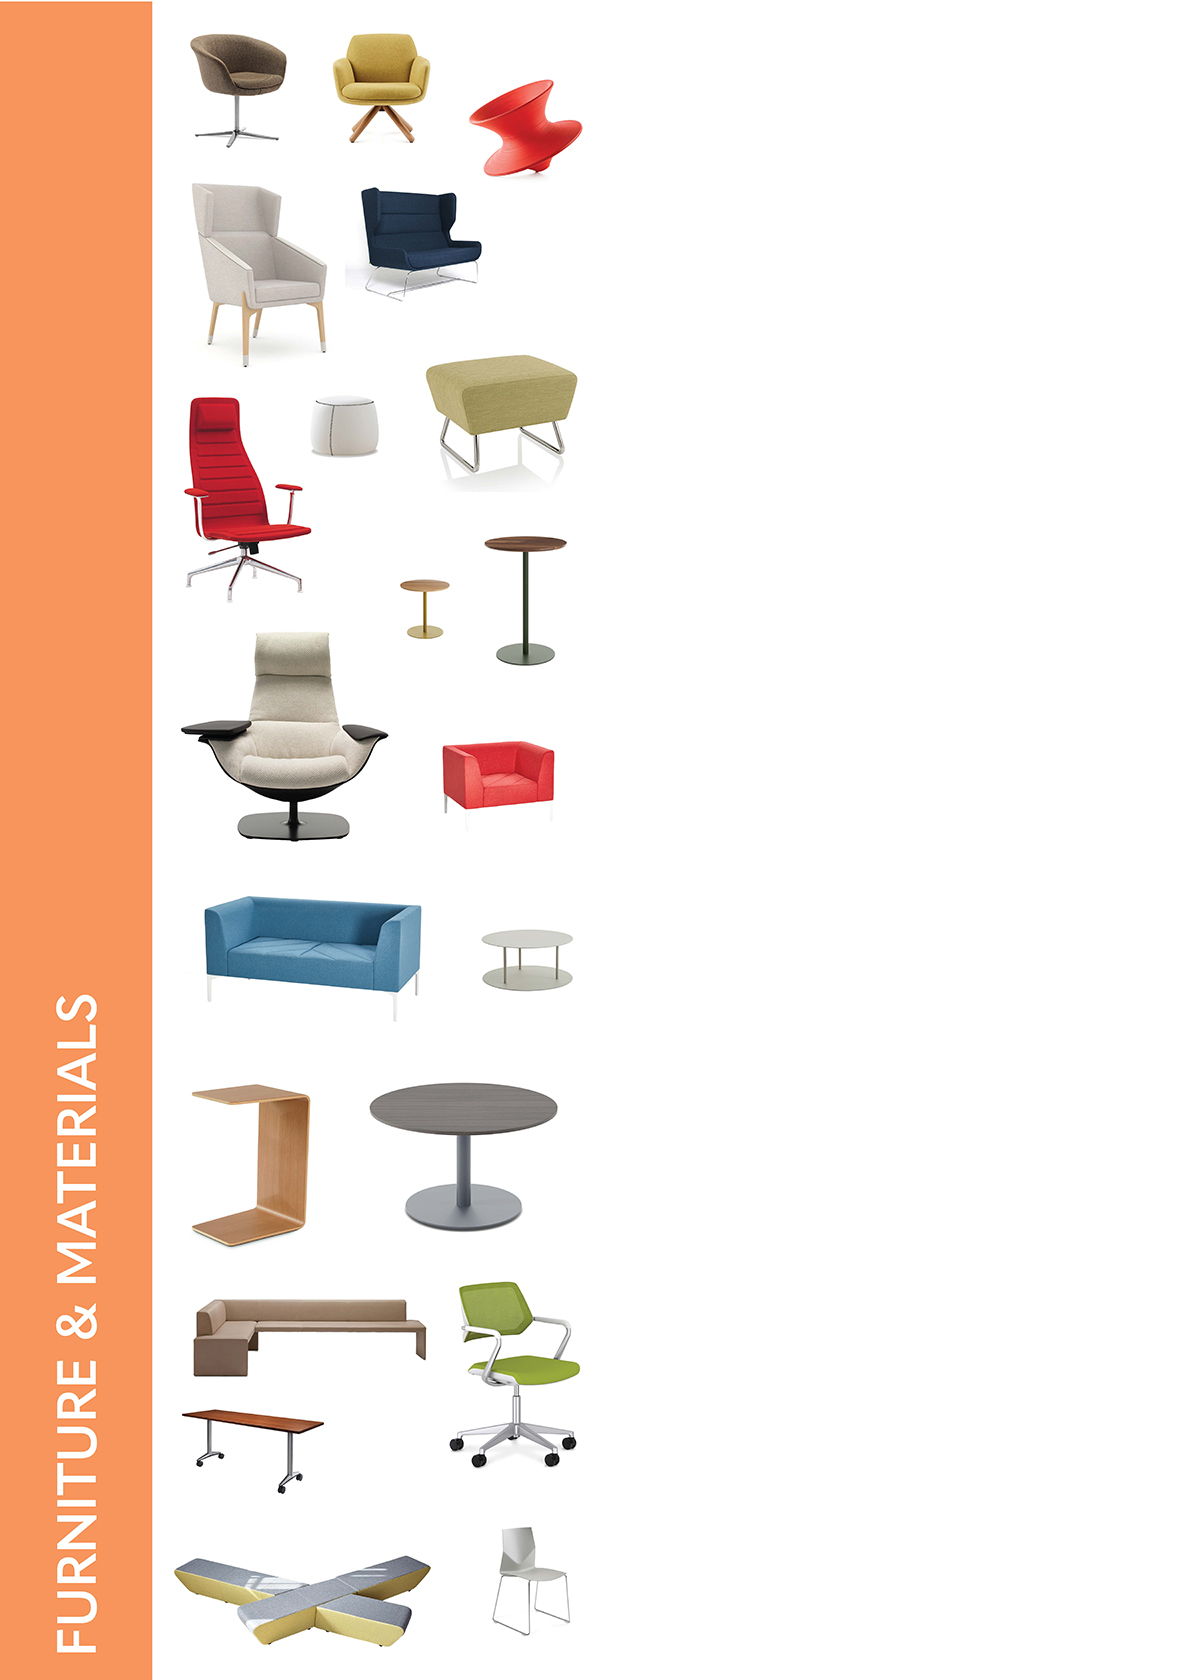 furniture selections